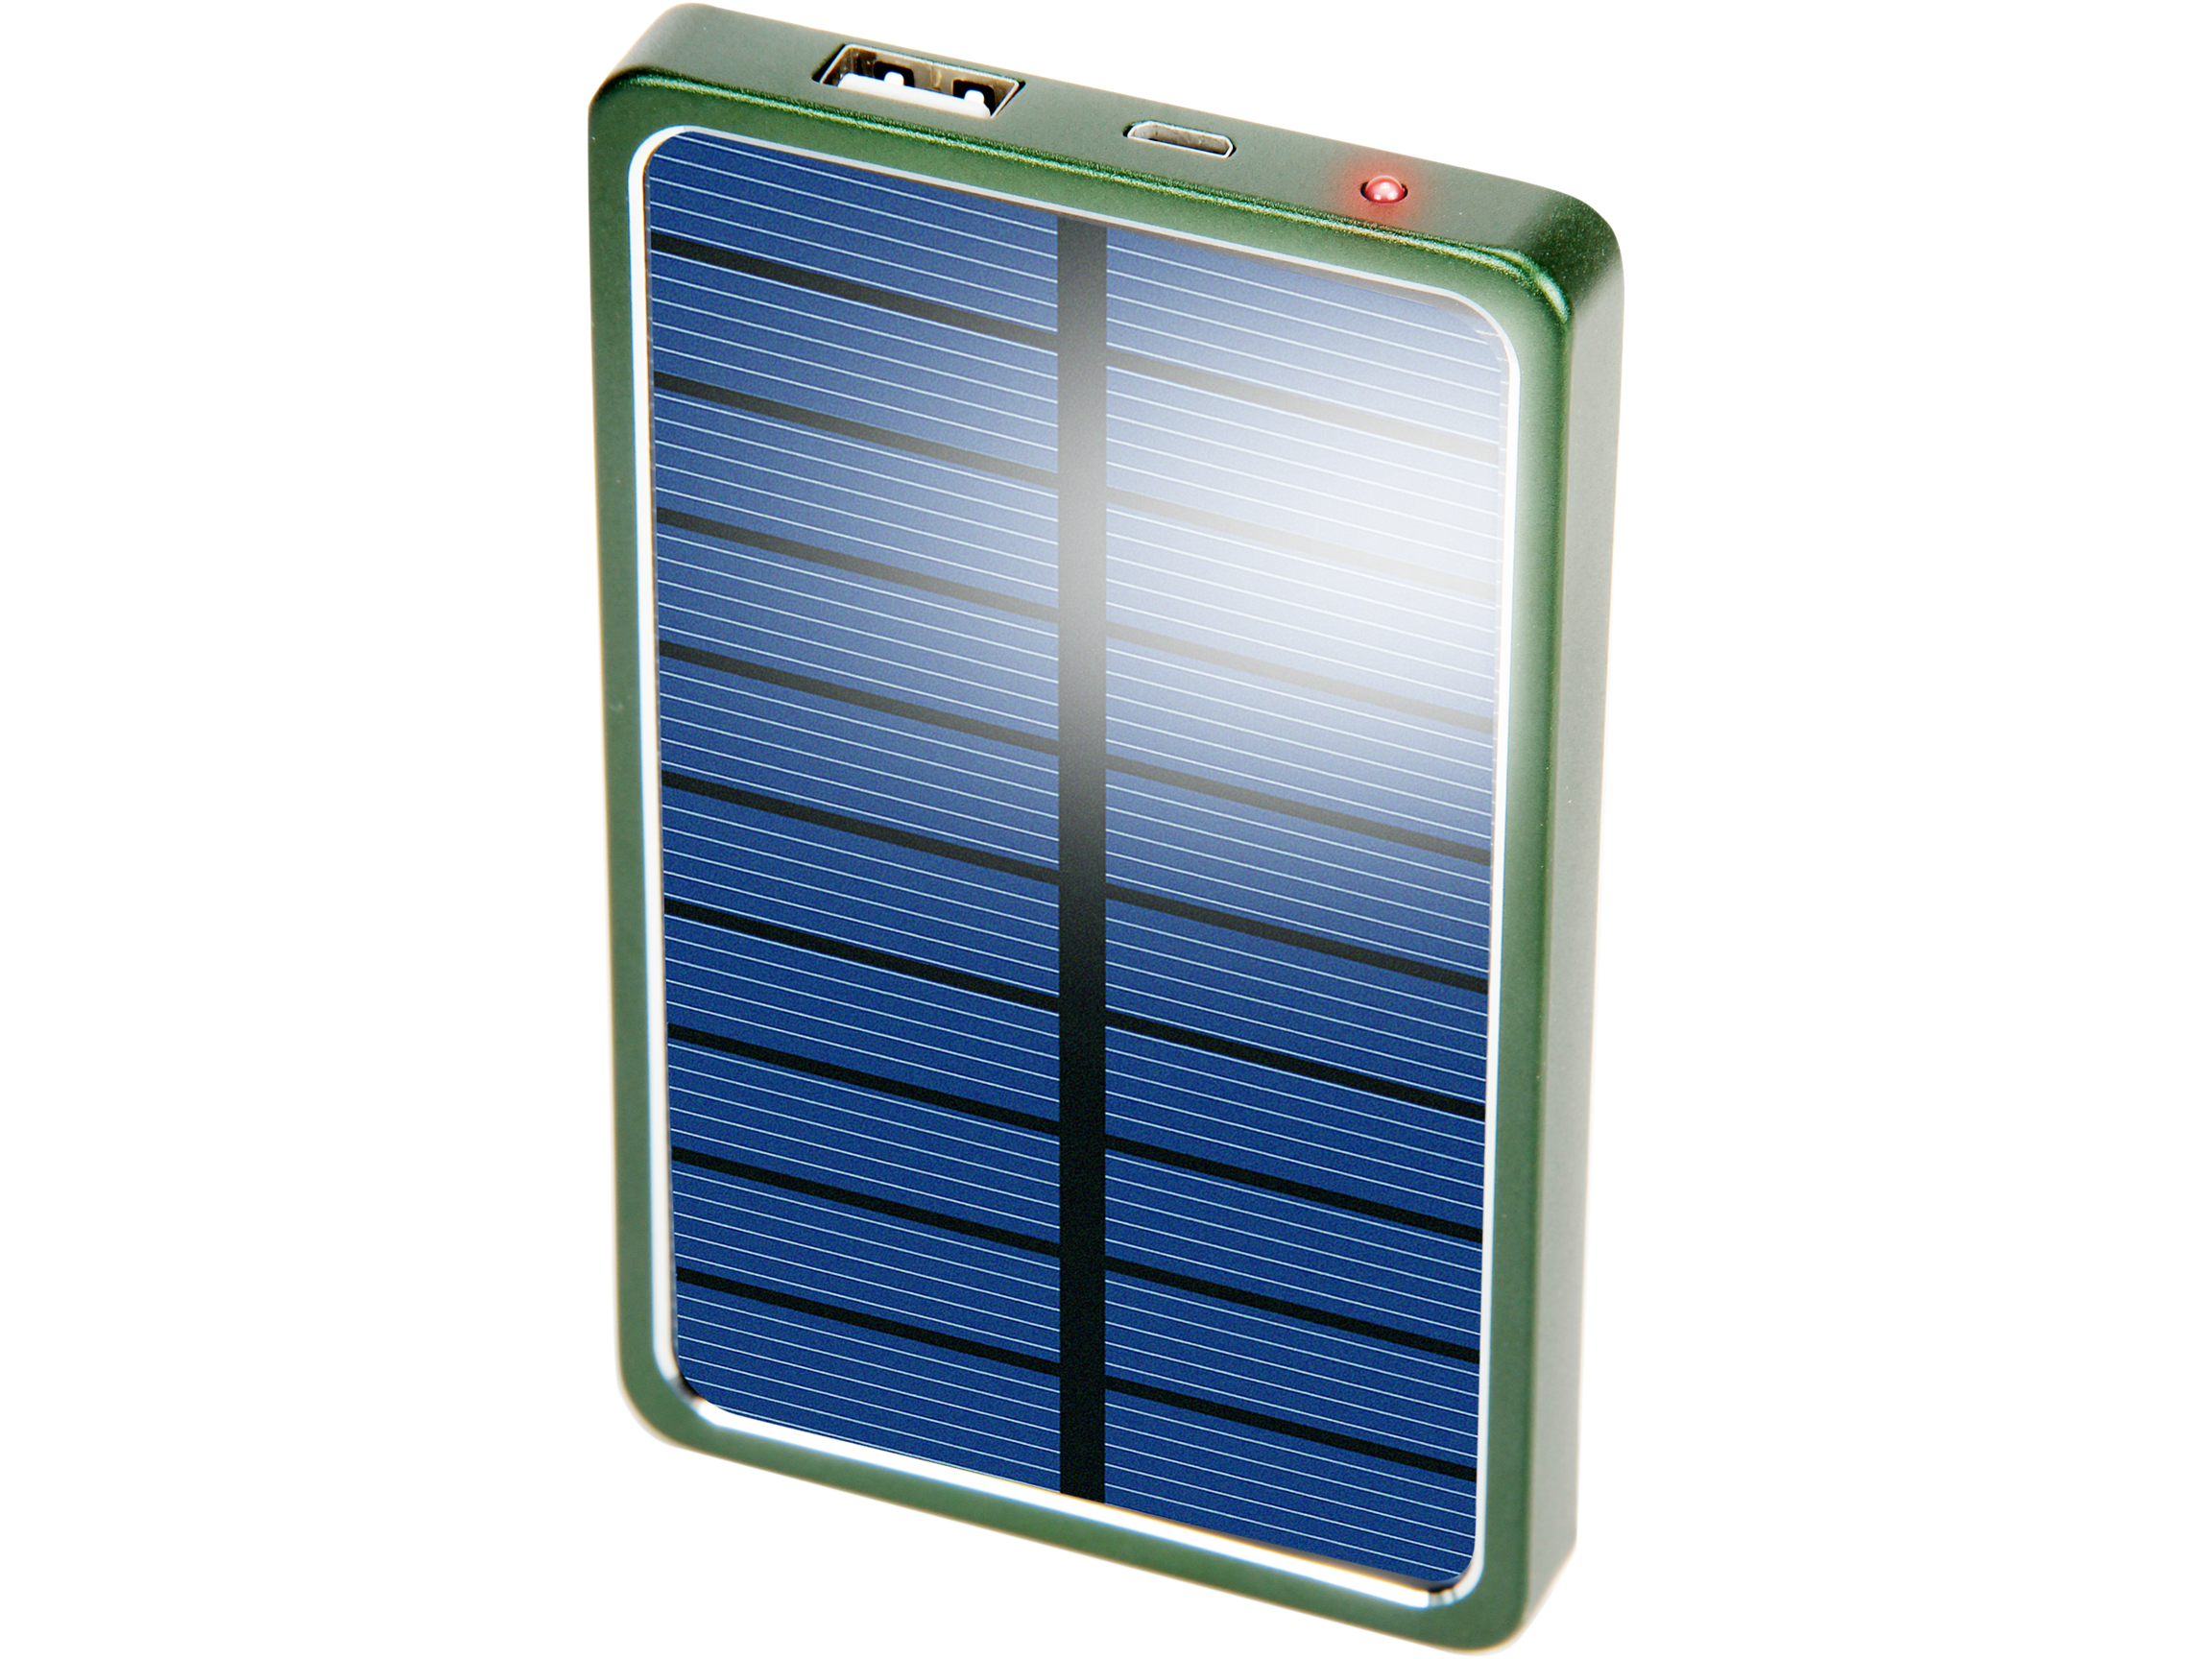 ReStore SL4000 4000mAh Power Bank with Backup Solar Panel and 1.5A USB Charging Port by ReVIVE   Works with Smartphones , Tablets ,  Players , Cameras and More Rechargeable Devices